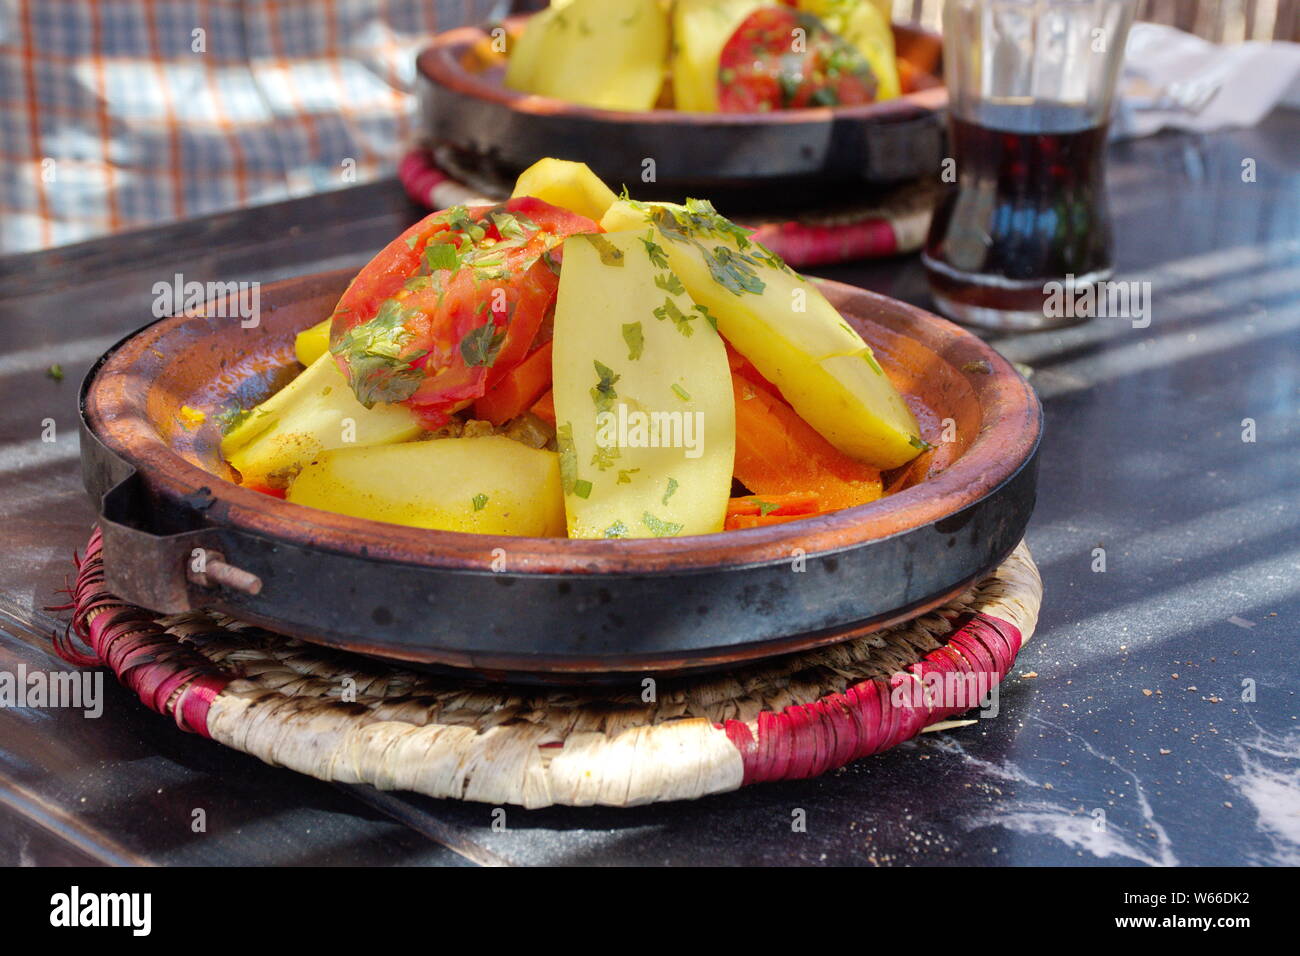 Vegetable tagine - traditional Moroccan food Stock Photo